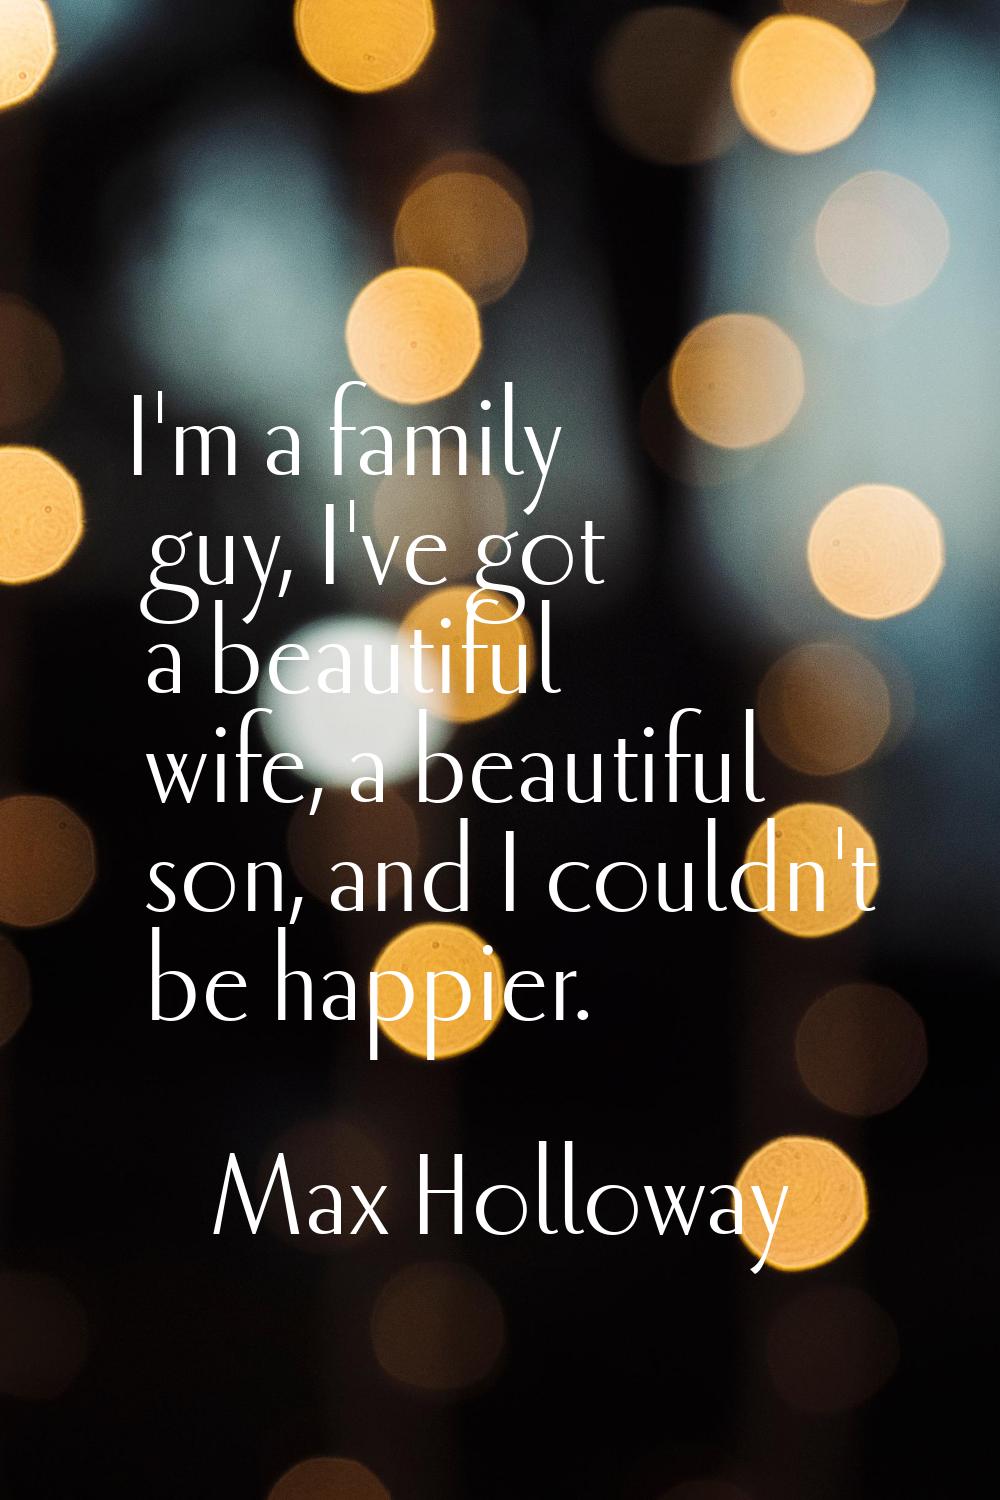 I'm a family guy, I've got a beautiful wife, a beautiful son, and I couldn't be happier.